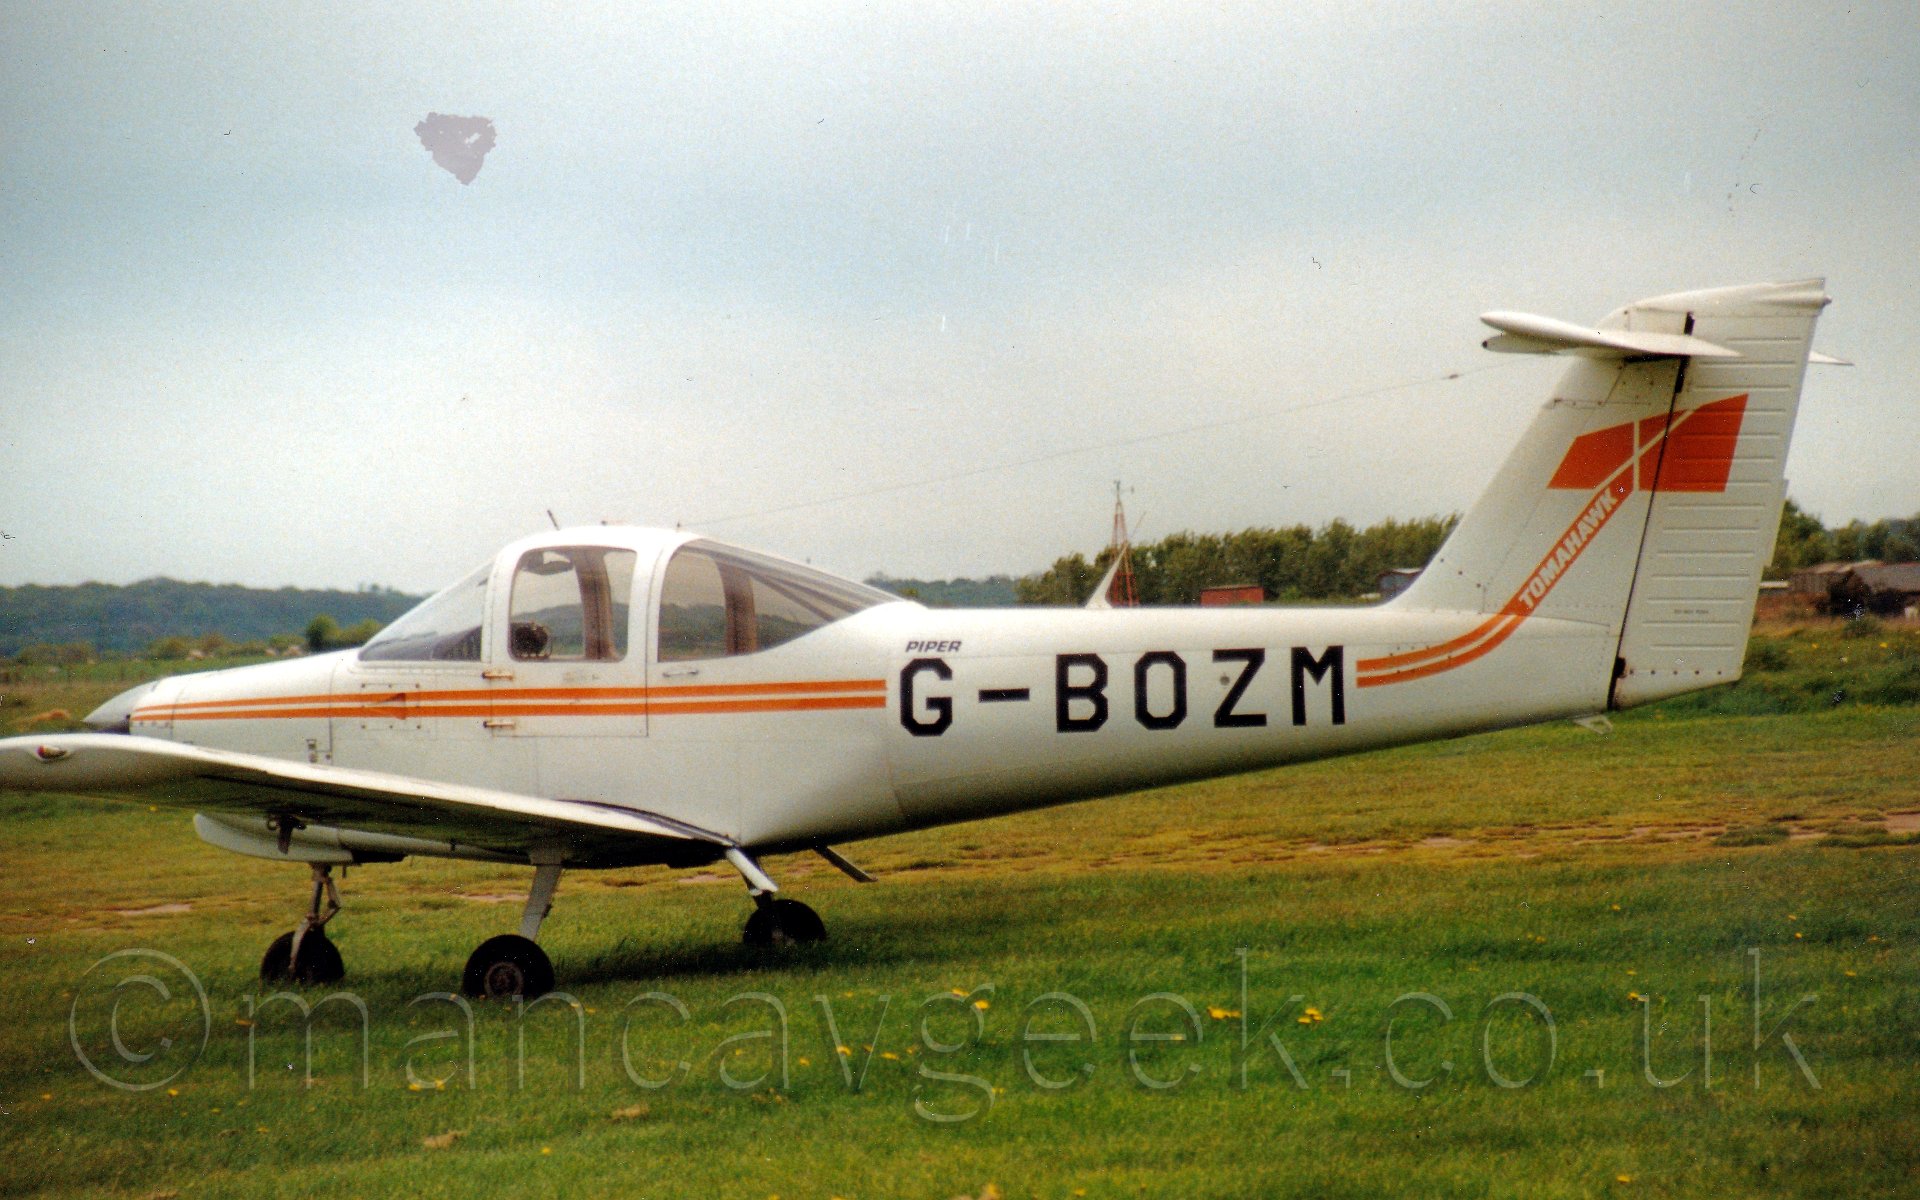 Side view of a single engined light aircraft parked on grass. The plane is mostly white, with a pair of thin orange stripes running along the fuselage, turning into an axe on the tail, with the word "Tomahawk" on the handle in white. The registration "G-BOZM" is displayed prominently on the fuselage. In the background, trees and bushes run to the horizon, under a grey sky.